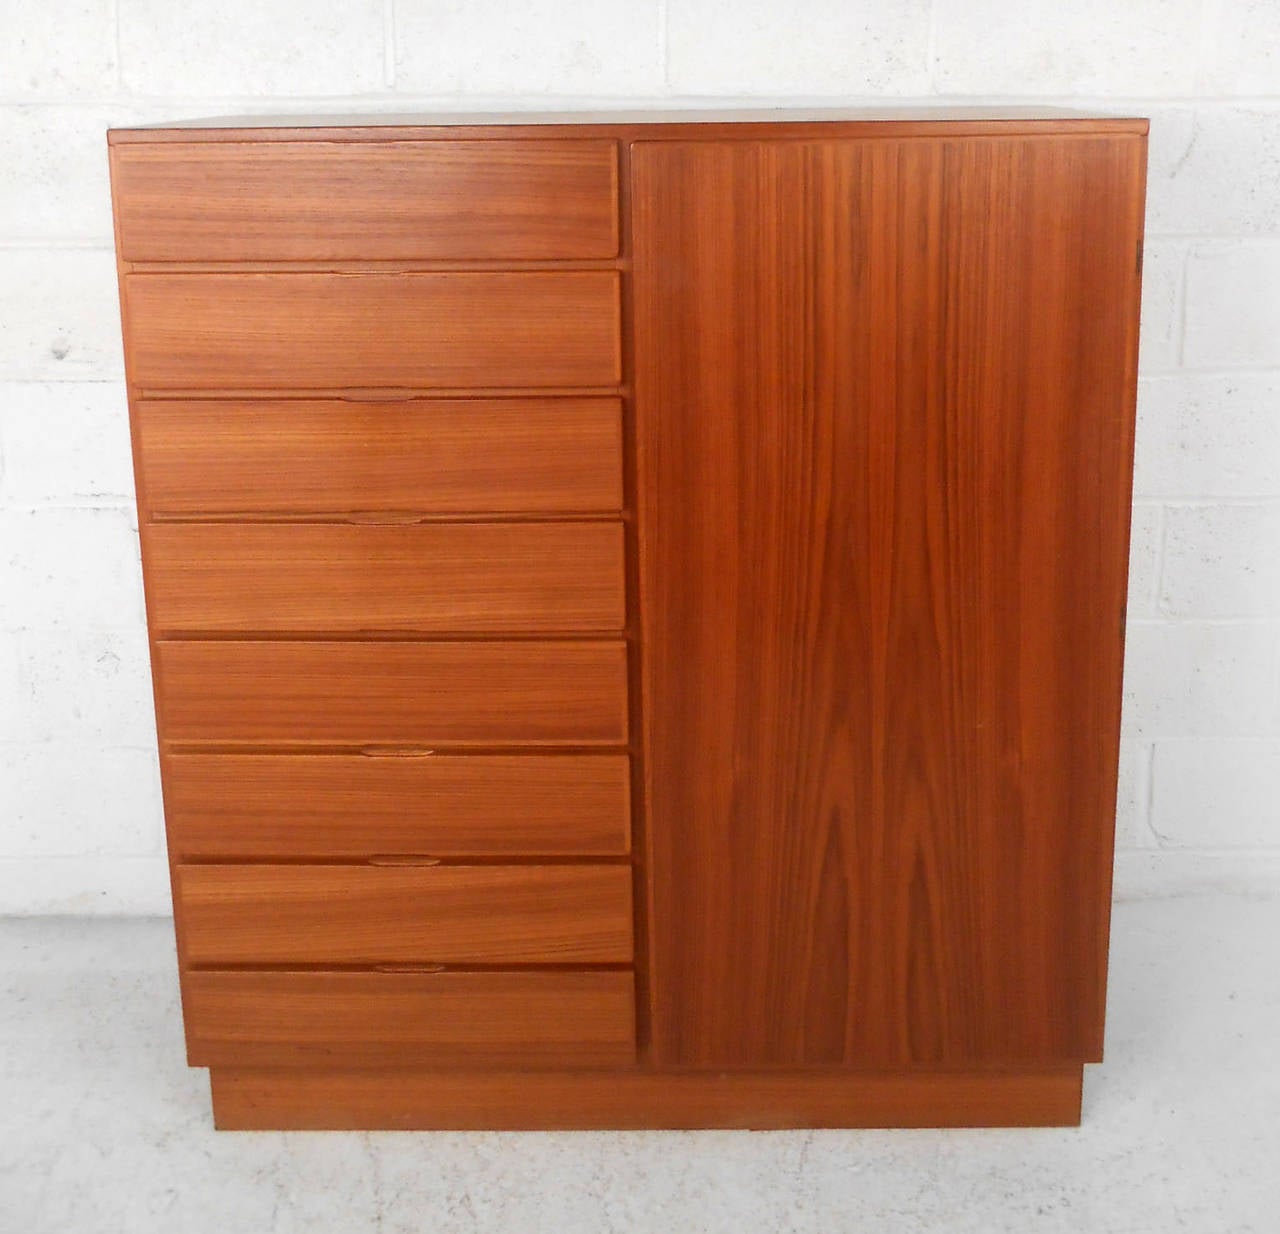 This multi-functional storage cabinet features heavy teak construction, finished back, and plenty of versatile storage for virtually any need.  Beautiful teak finish makes this a wonderful mid-century addition to any room in need of cabinet and